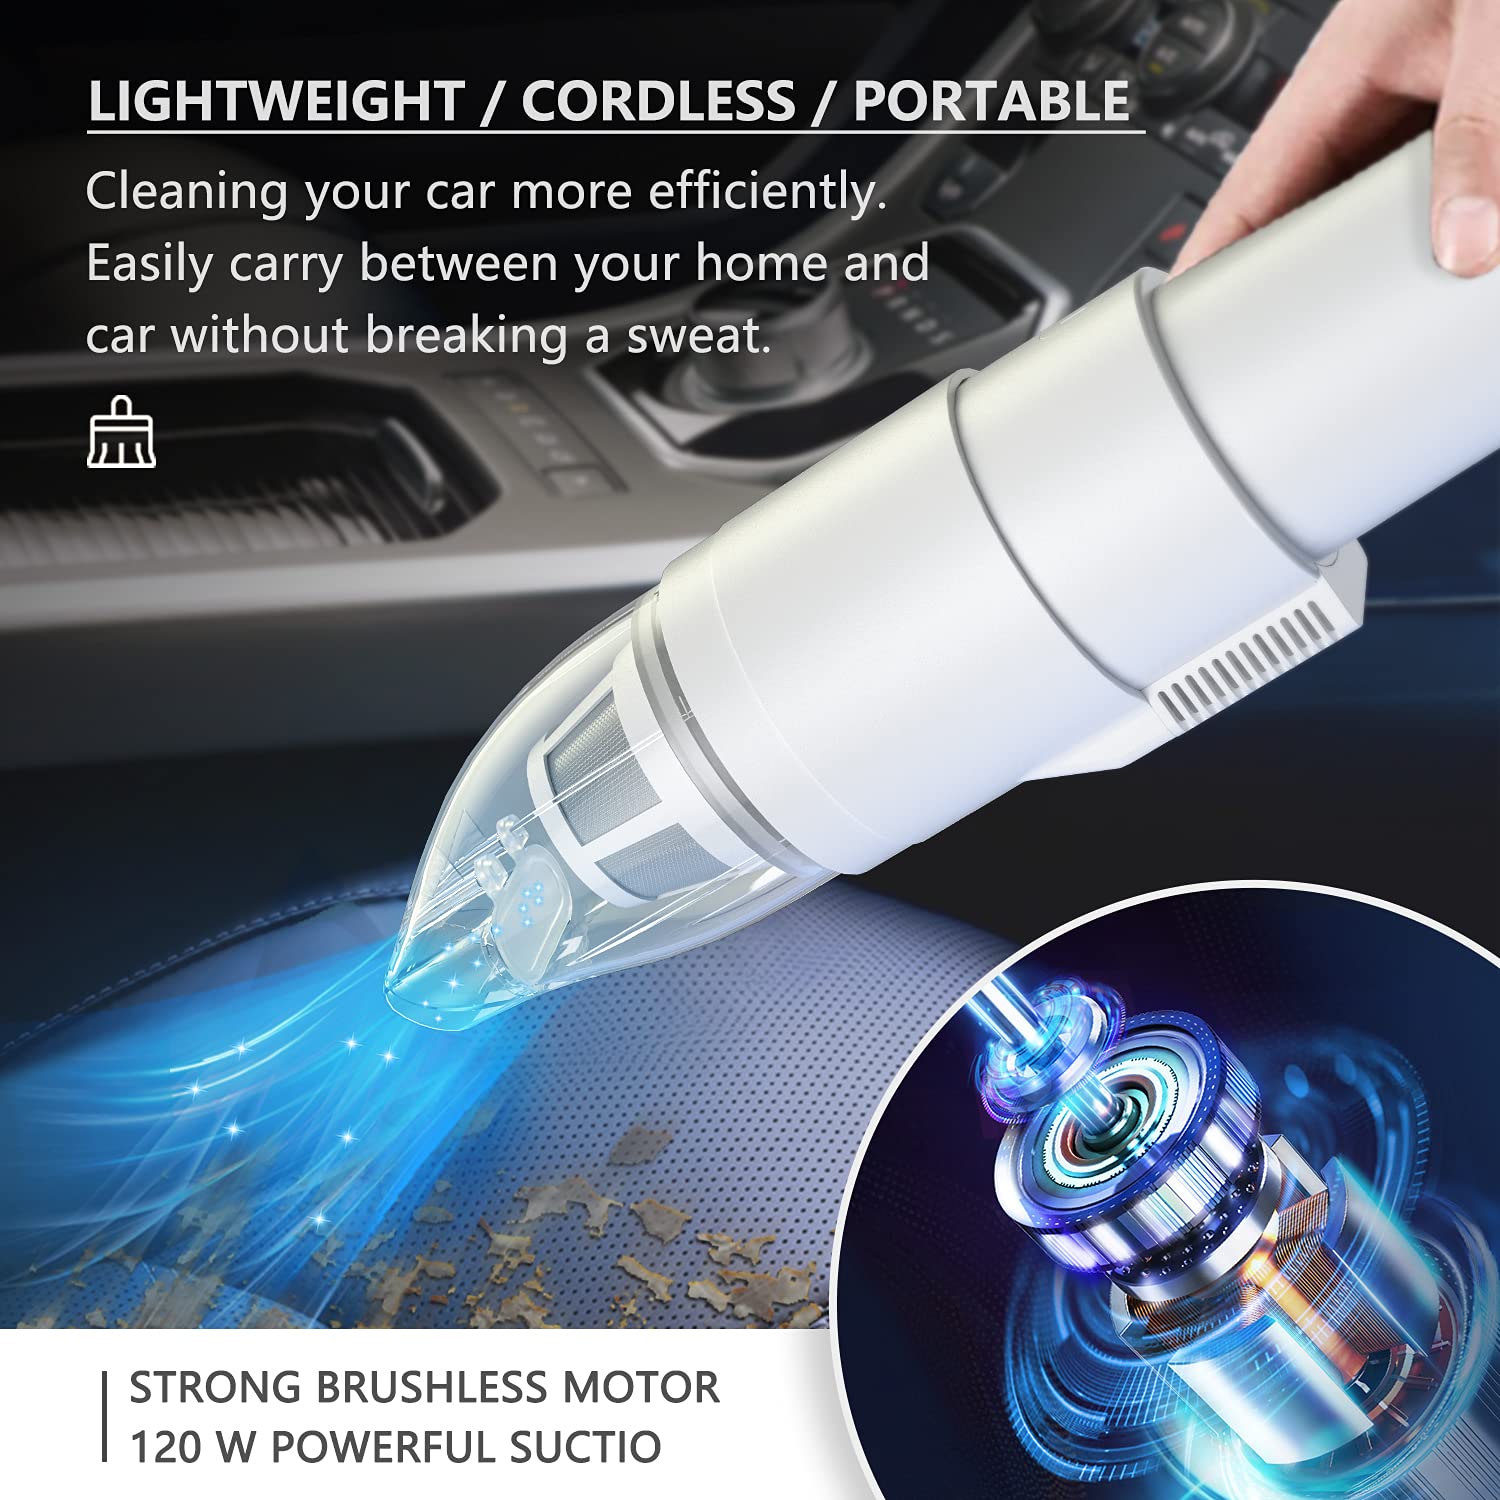 EASYOB Handheld Vacuum Cordless, Car Vacuum Cleaner 15Kpa Powerful Suction, Two-speeds Adjustable, USB Charging, Small Hand Vacuum for Car, Office and Home, Brushless Motor 120W-(A046), A006 White